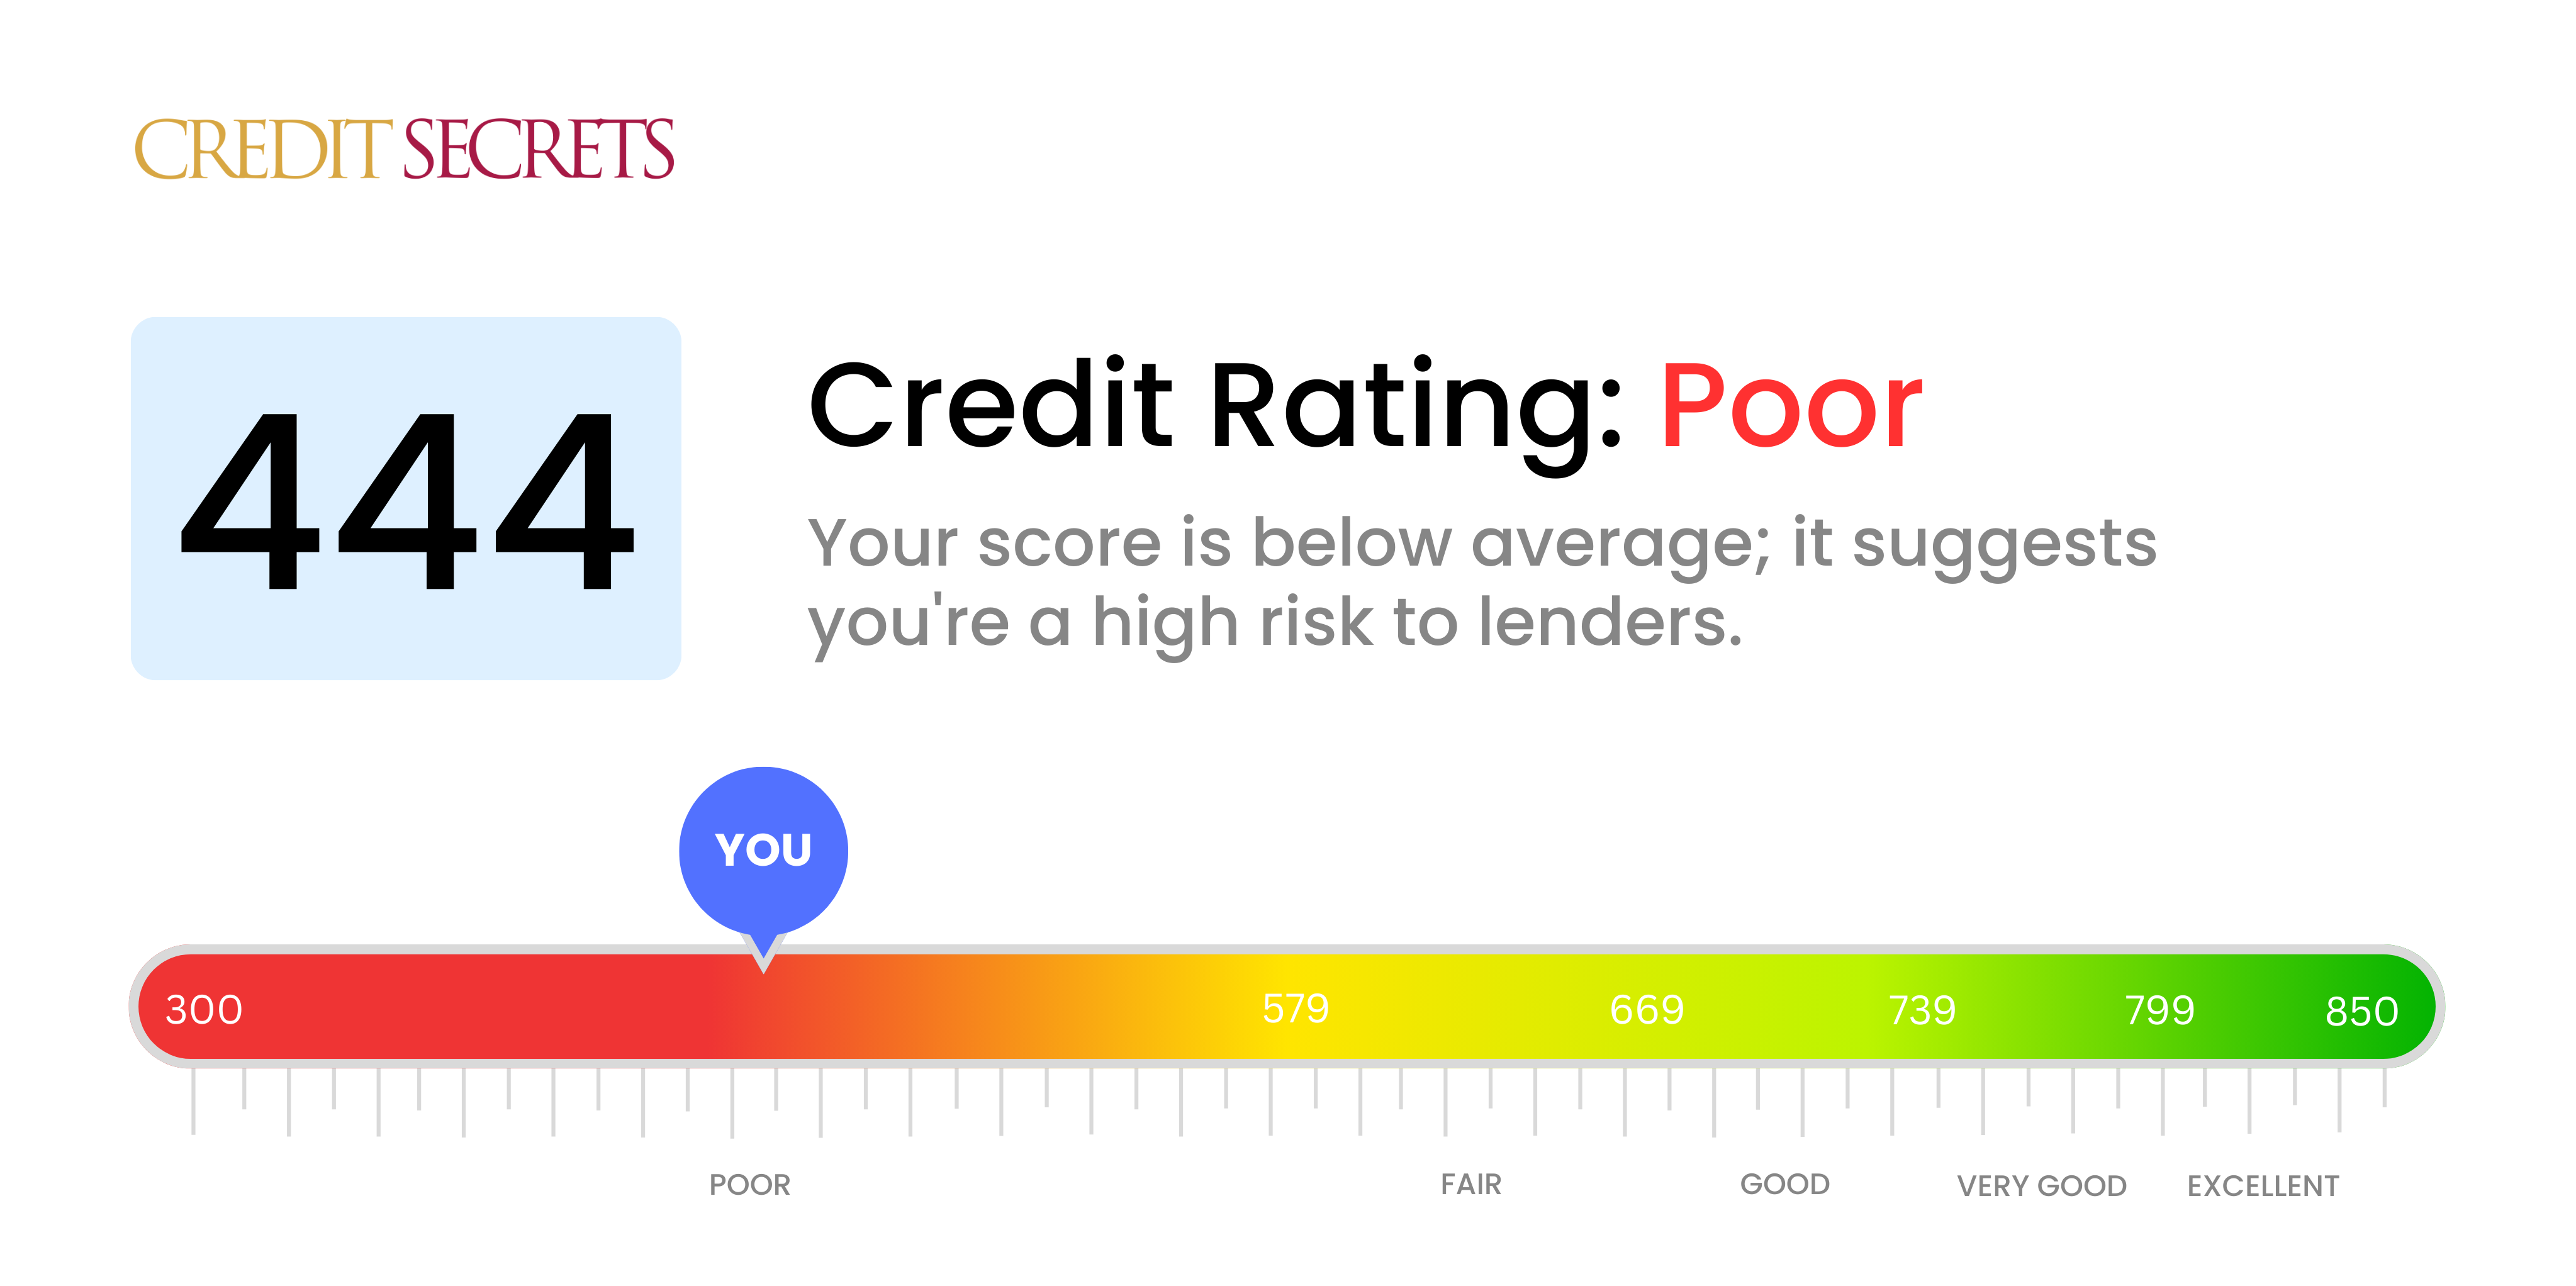 Is 444 a good credit score?